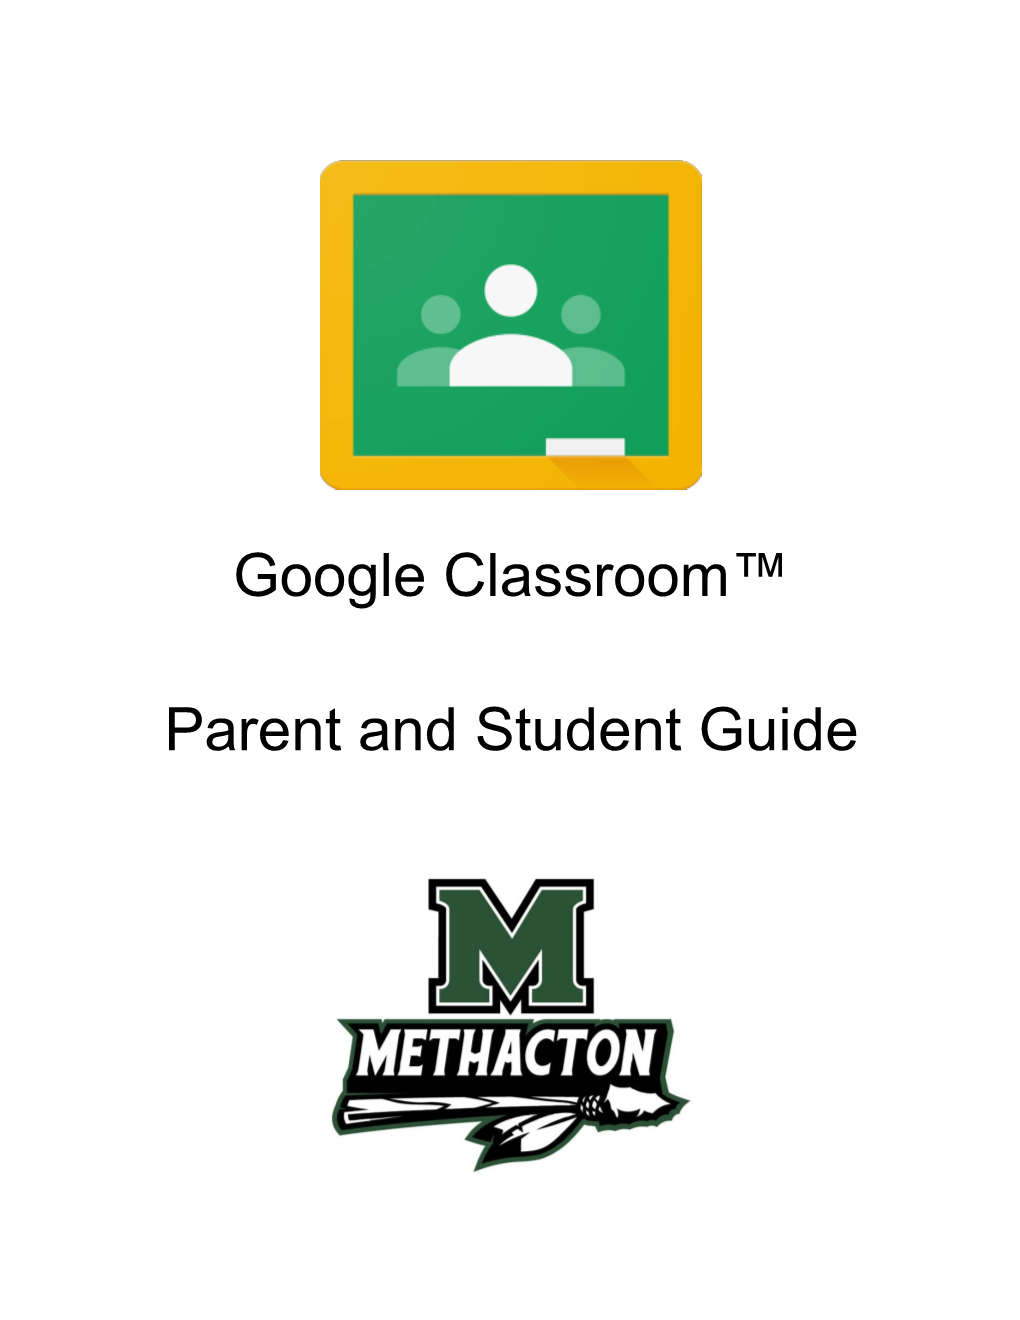 What Is Google Classroom?